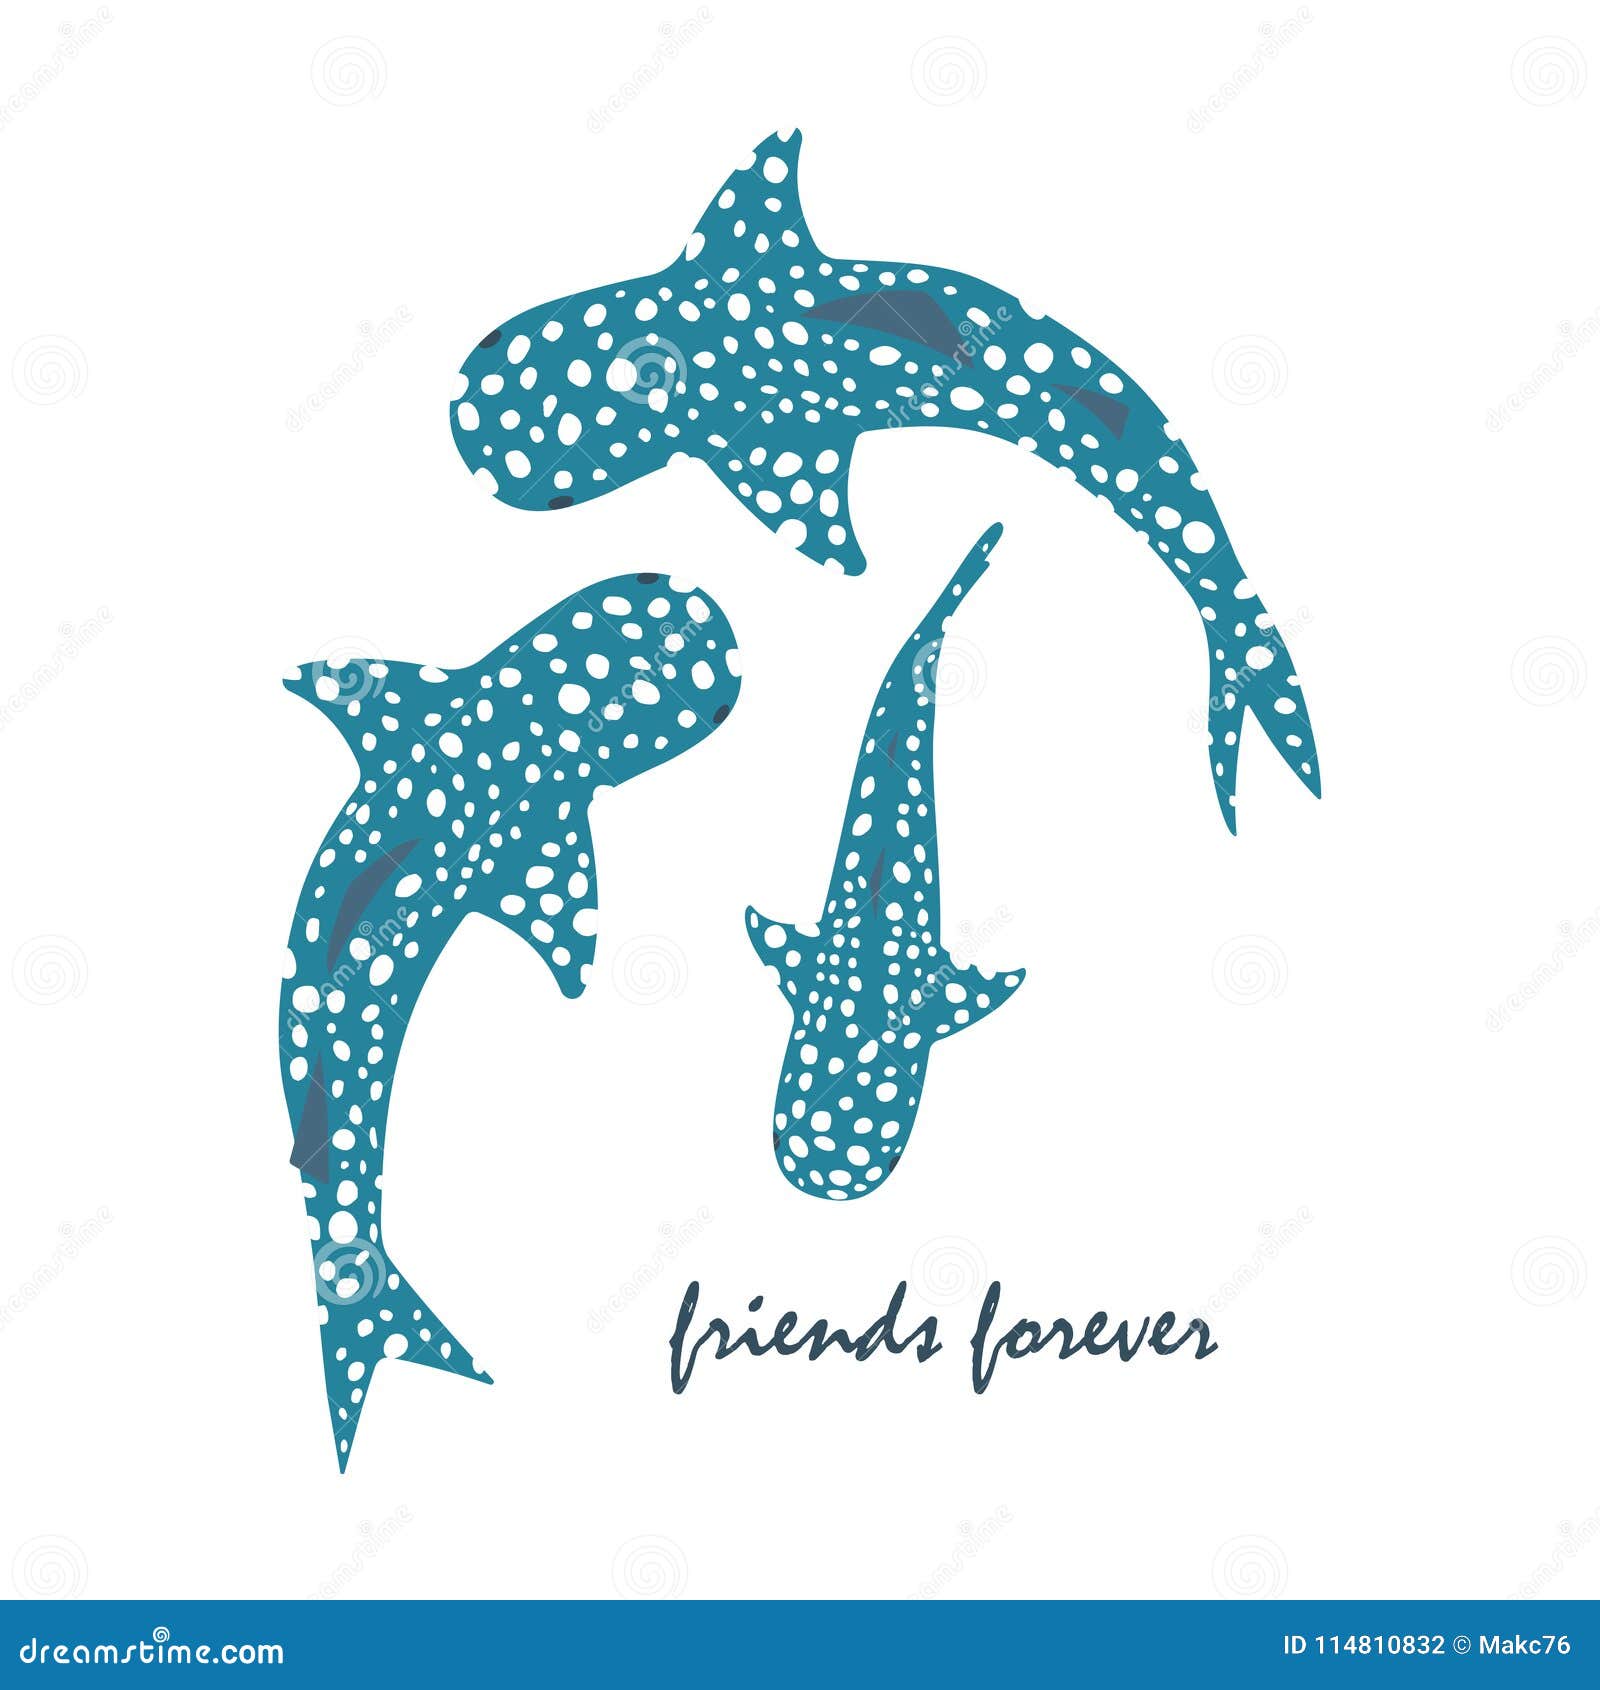 Whale Shark With Coral Canvas Art by The Cosmic Whale | iCanvas